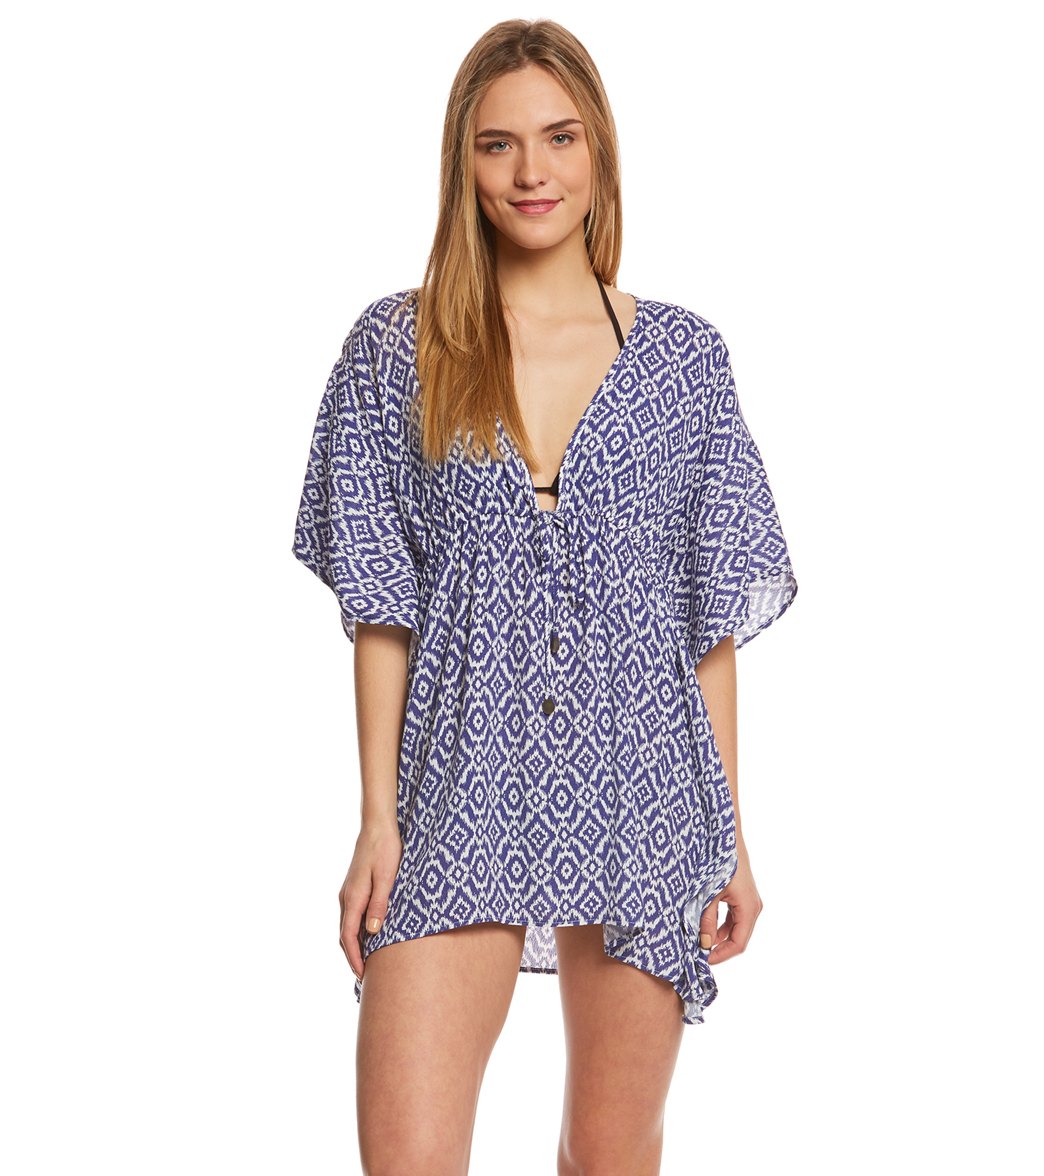 Lucy Love Beautiful Times Tunic at SwimOutlet.com - Free Shipping